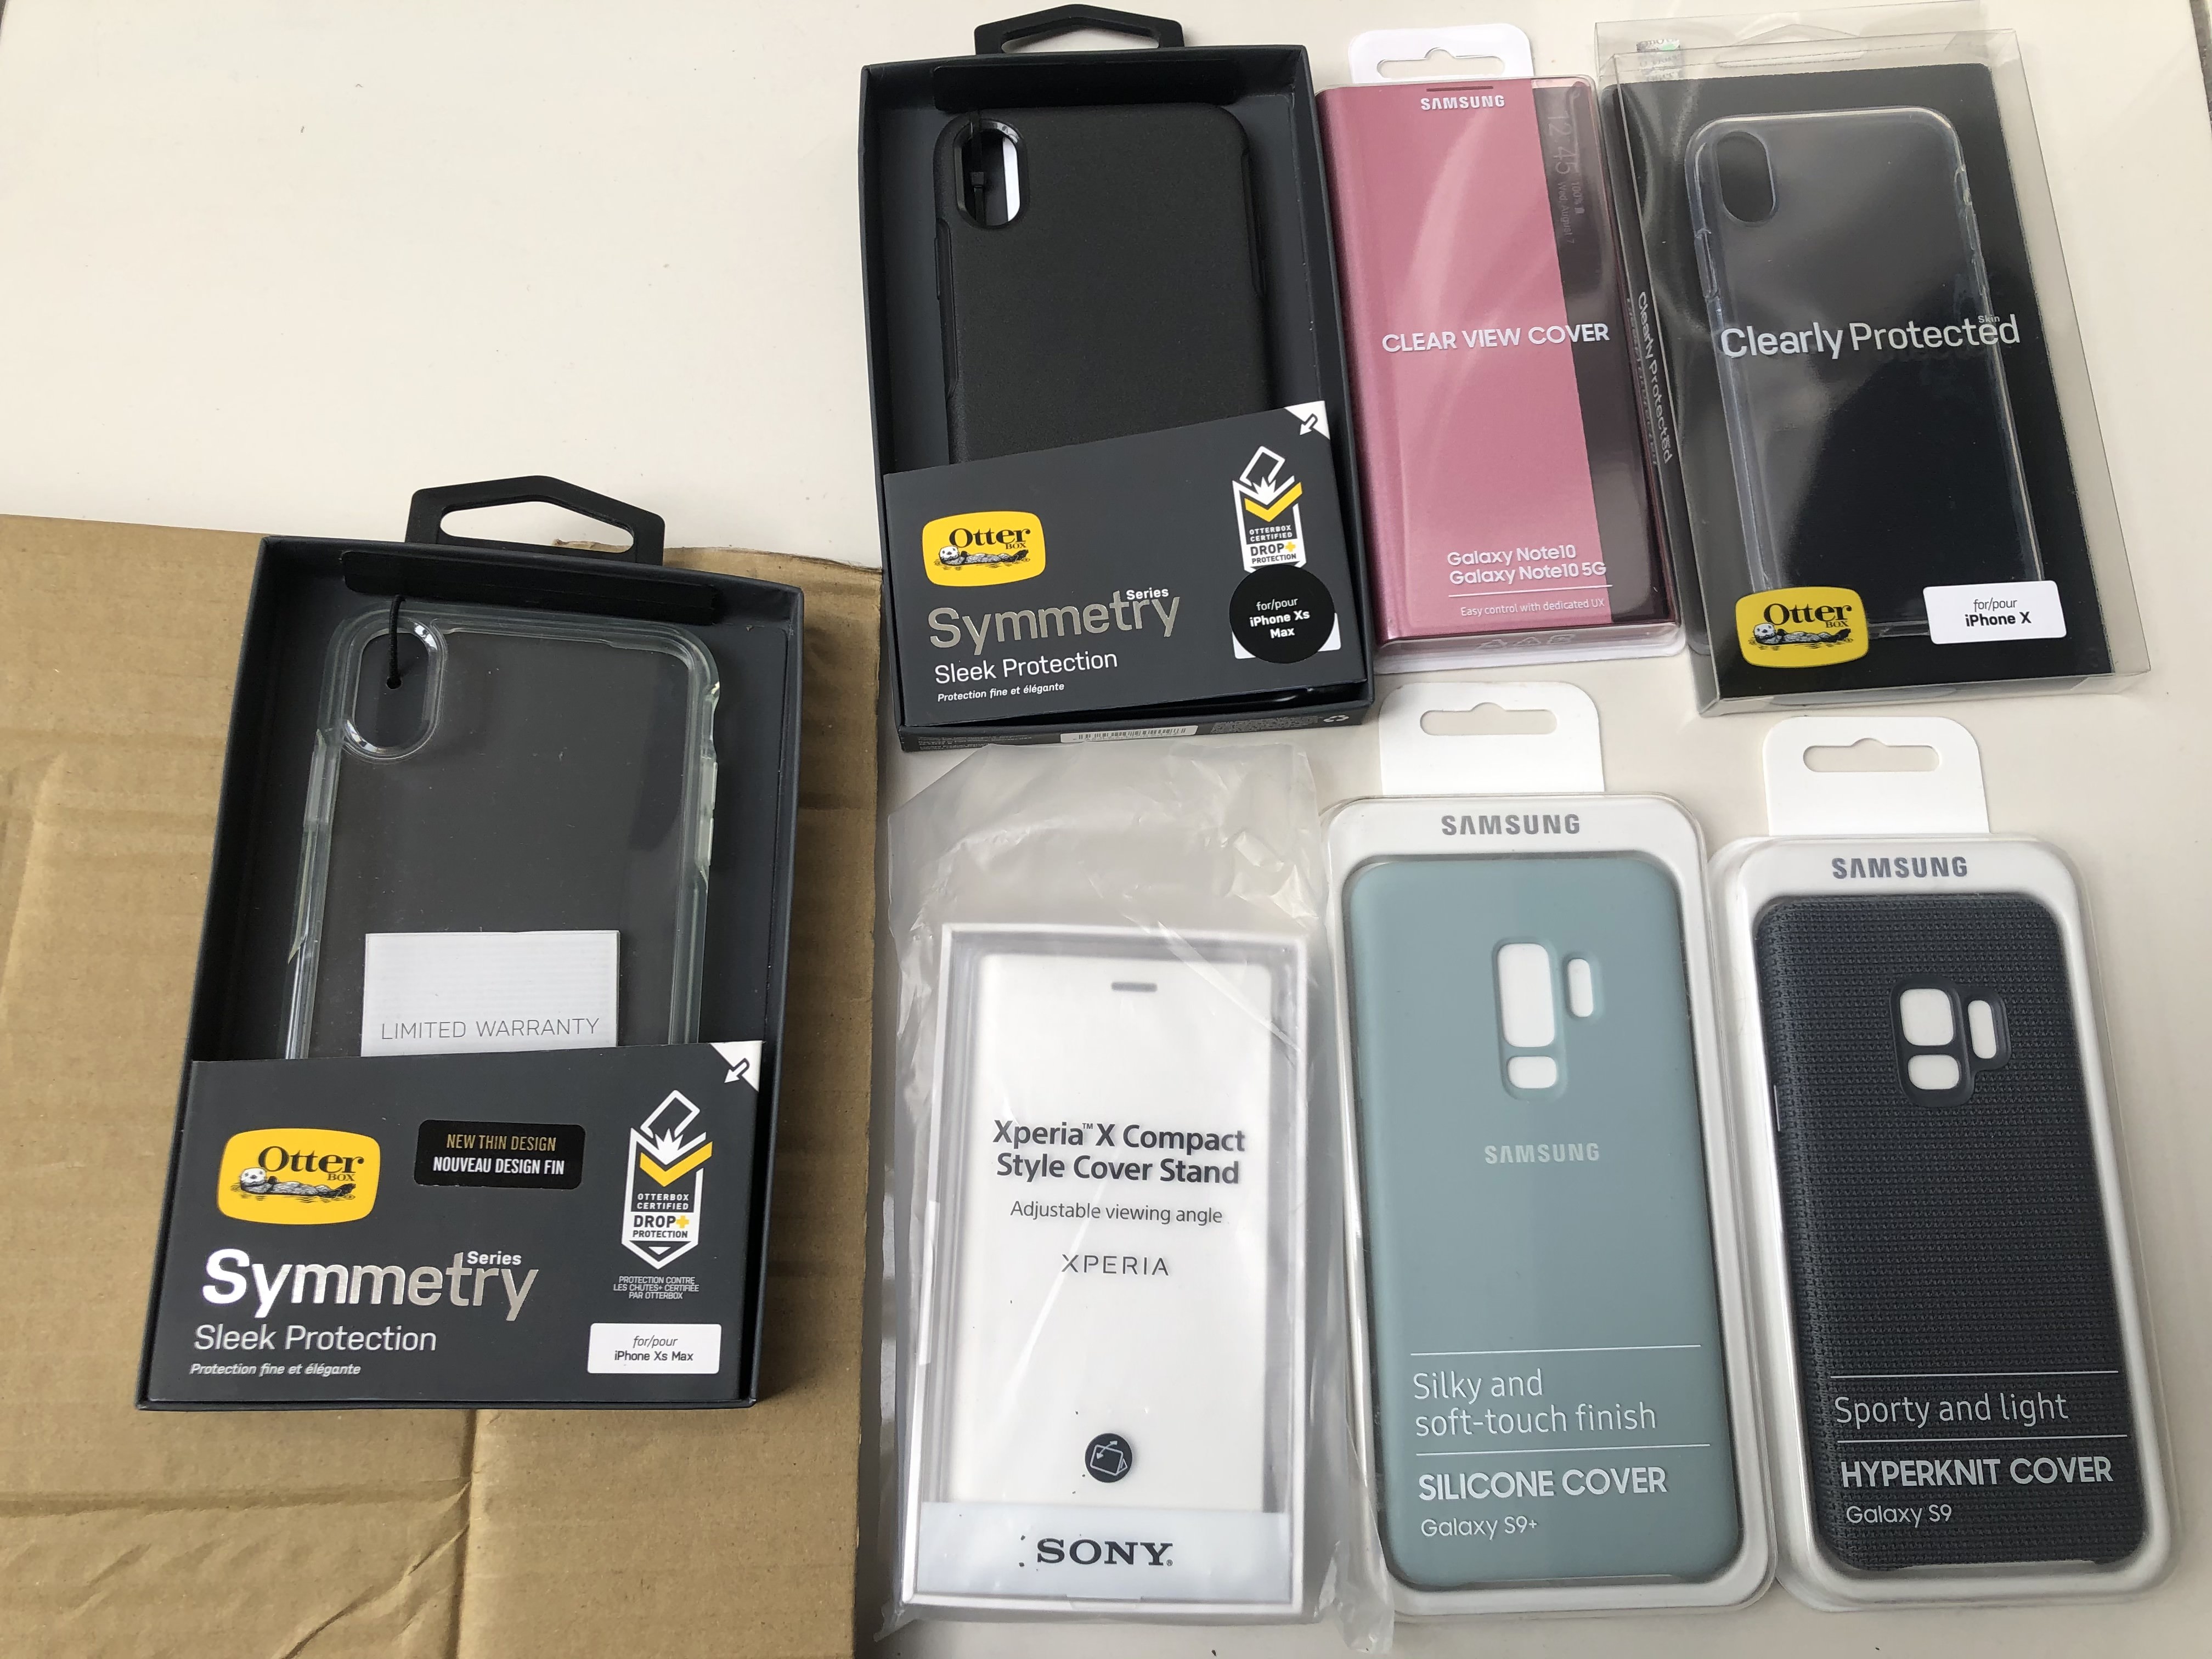 JOBLOT Clearance 73 x Genuine Samsung/Otterbox/Sony Mobile Phone Cases-Retail Packaged